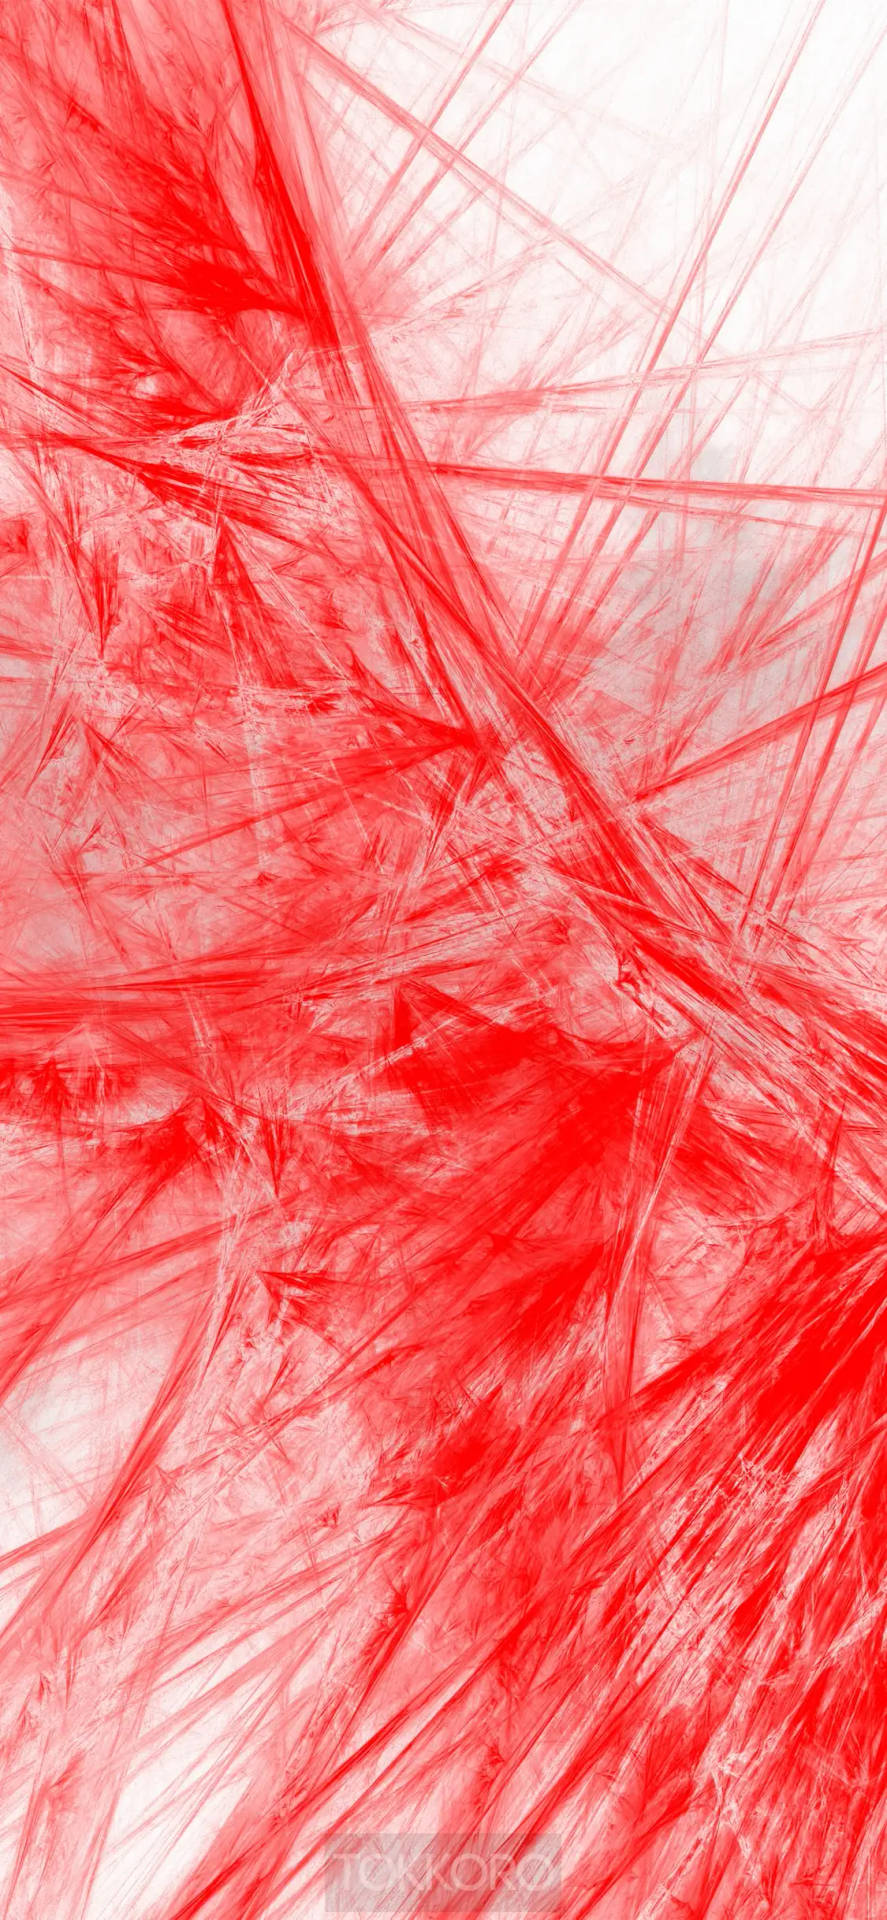 Iphone 11 Pro Red Shards Wallpaper